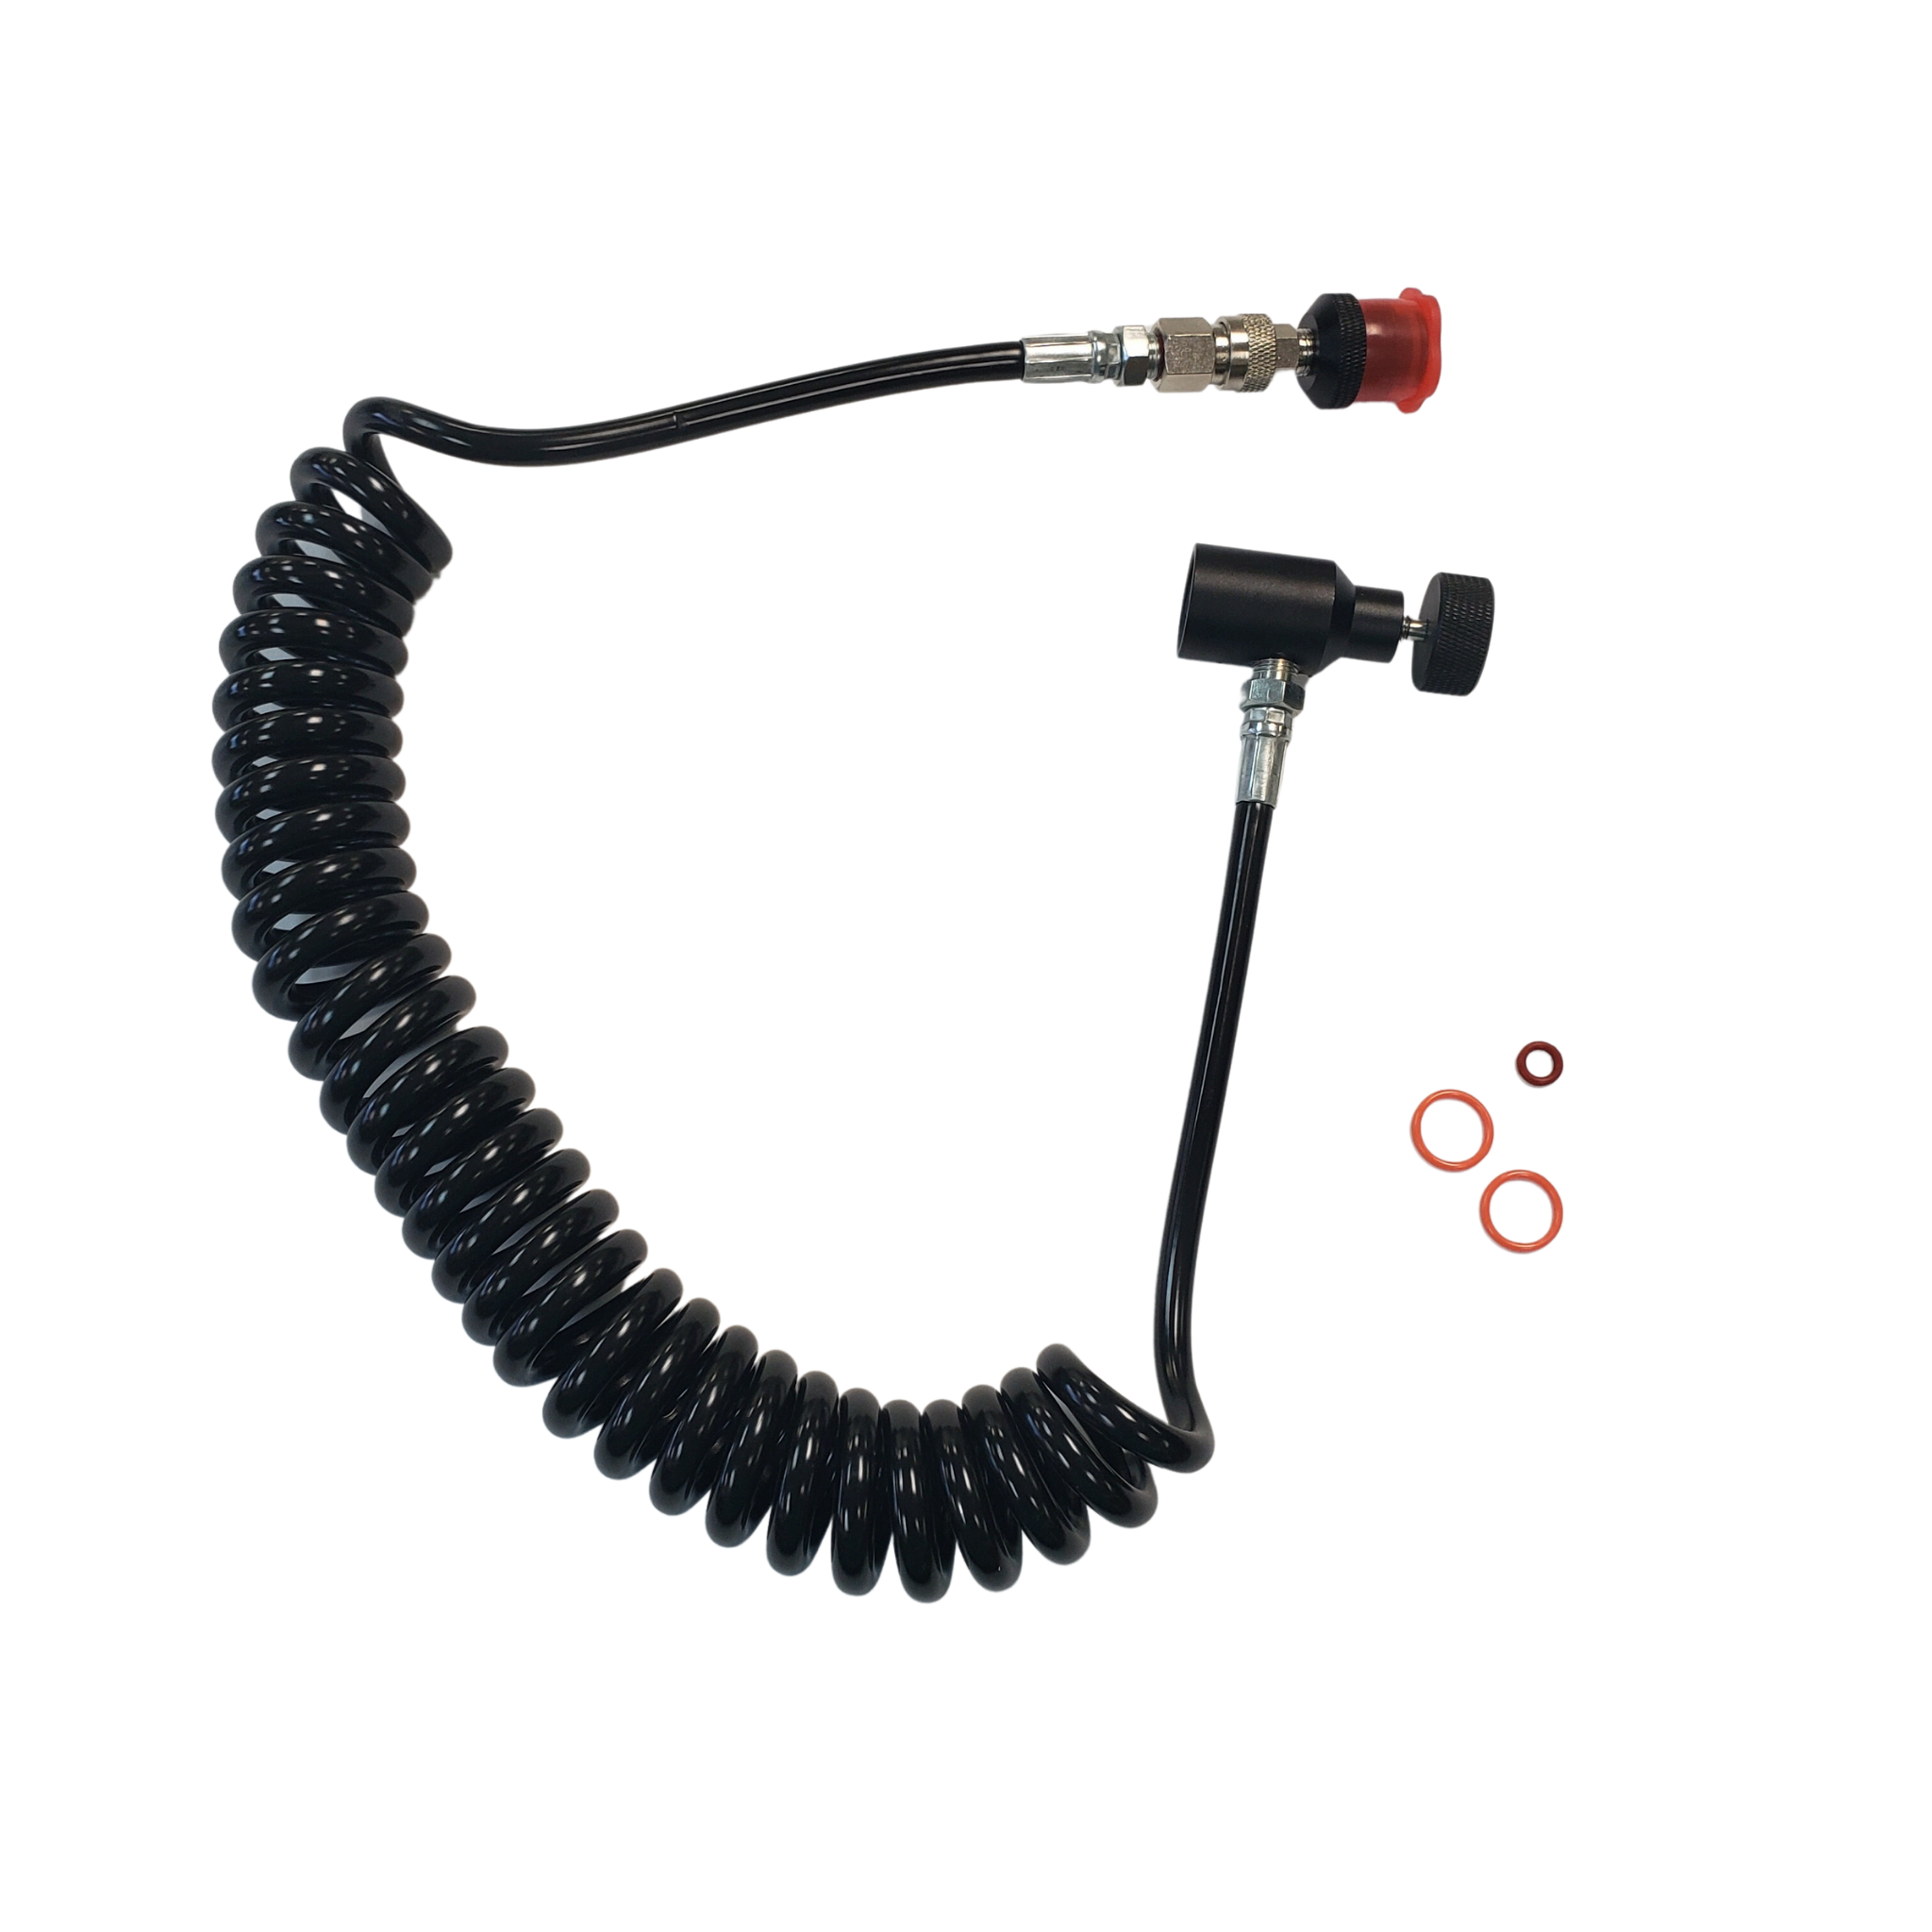 3Skull Paintball Coiled Remote with Quick Disconnect